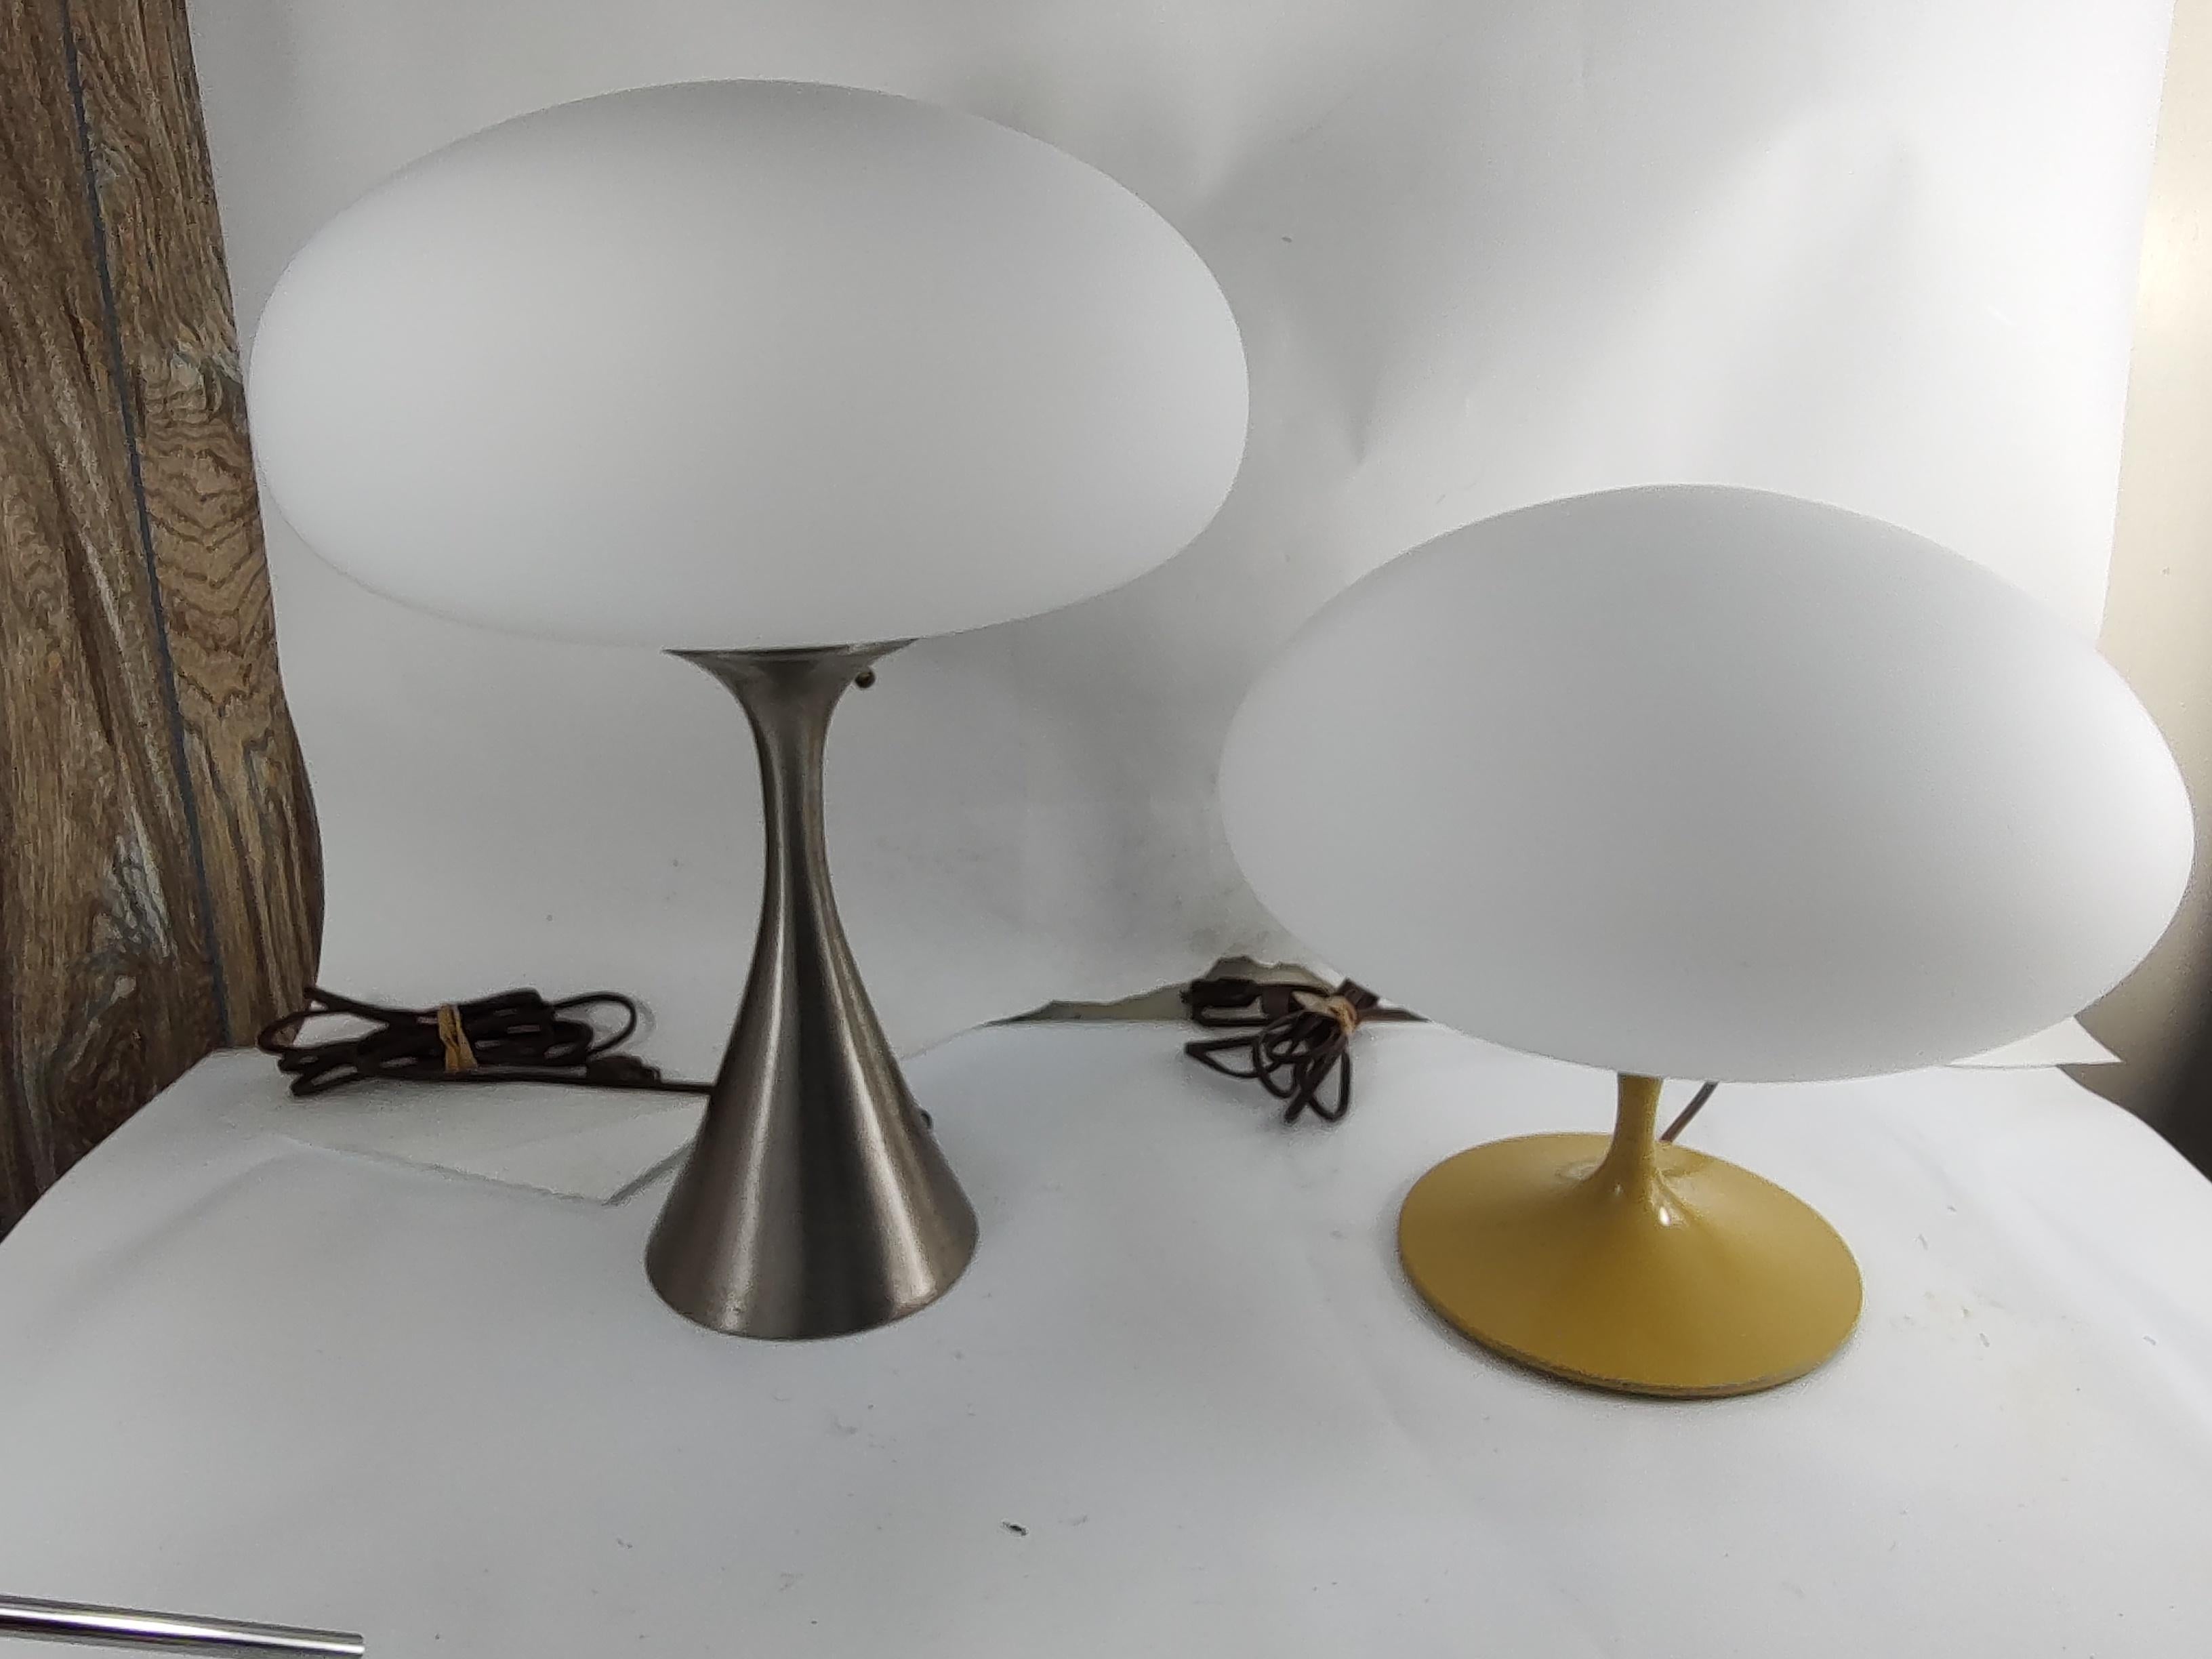 Art Glass Mid Century Modern Sculptural Mushroom Table Lamps by Laurel Lamp Co. C1965 For Sale